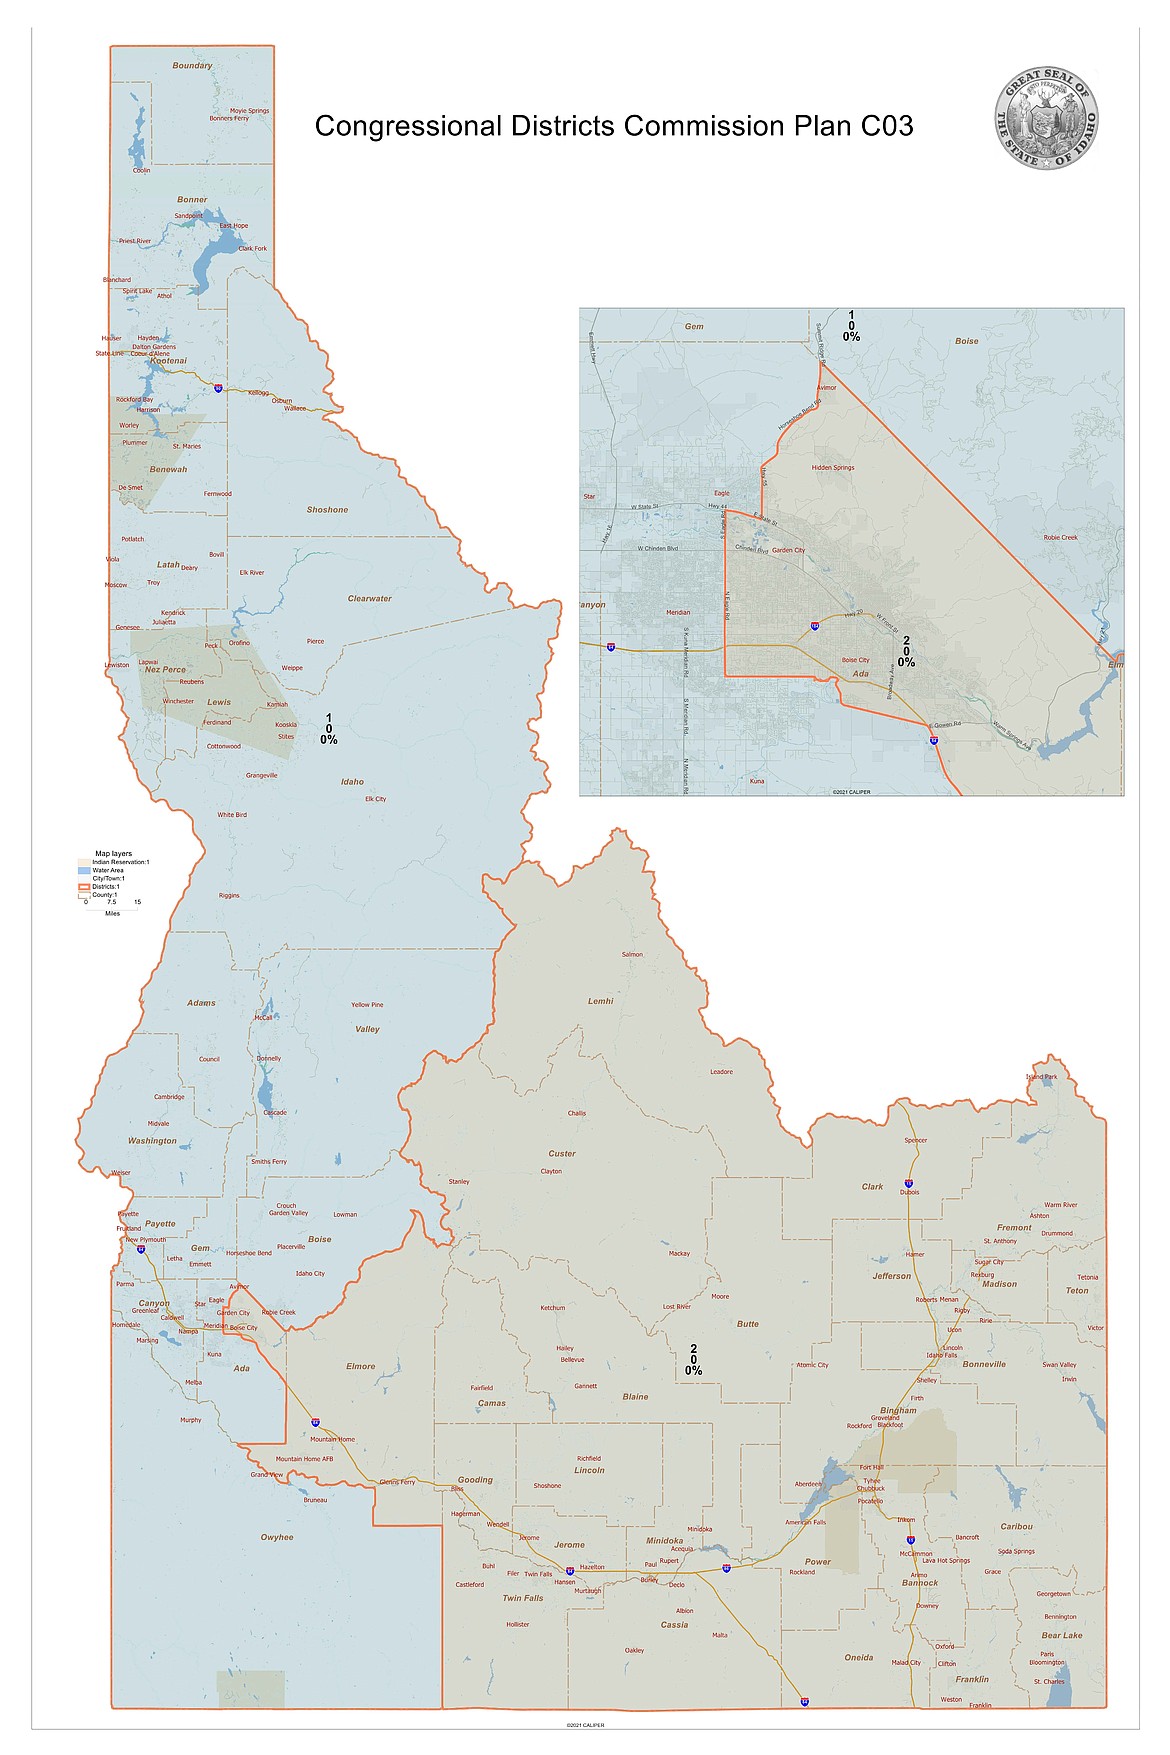 Idaho’s bipartisan redistricting commission voted 4-2 to approve a new congressional map which splits Ada County but divides Idaho’s population in half.